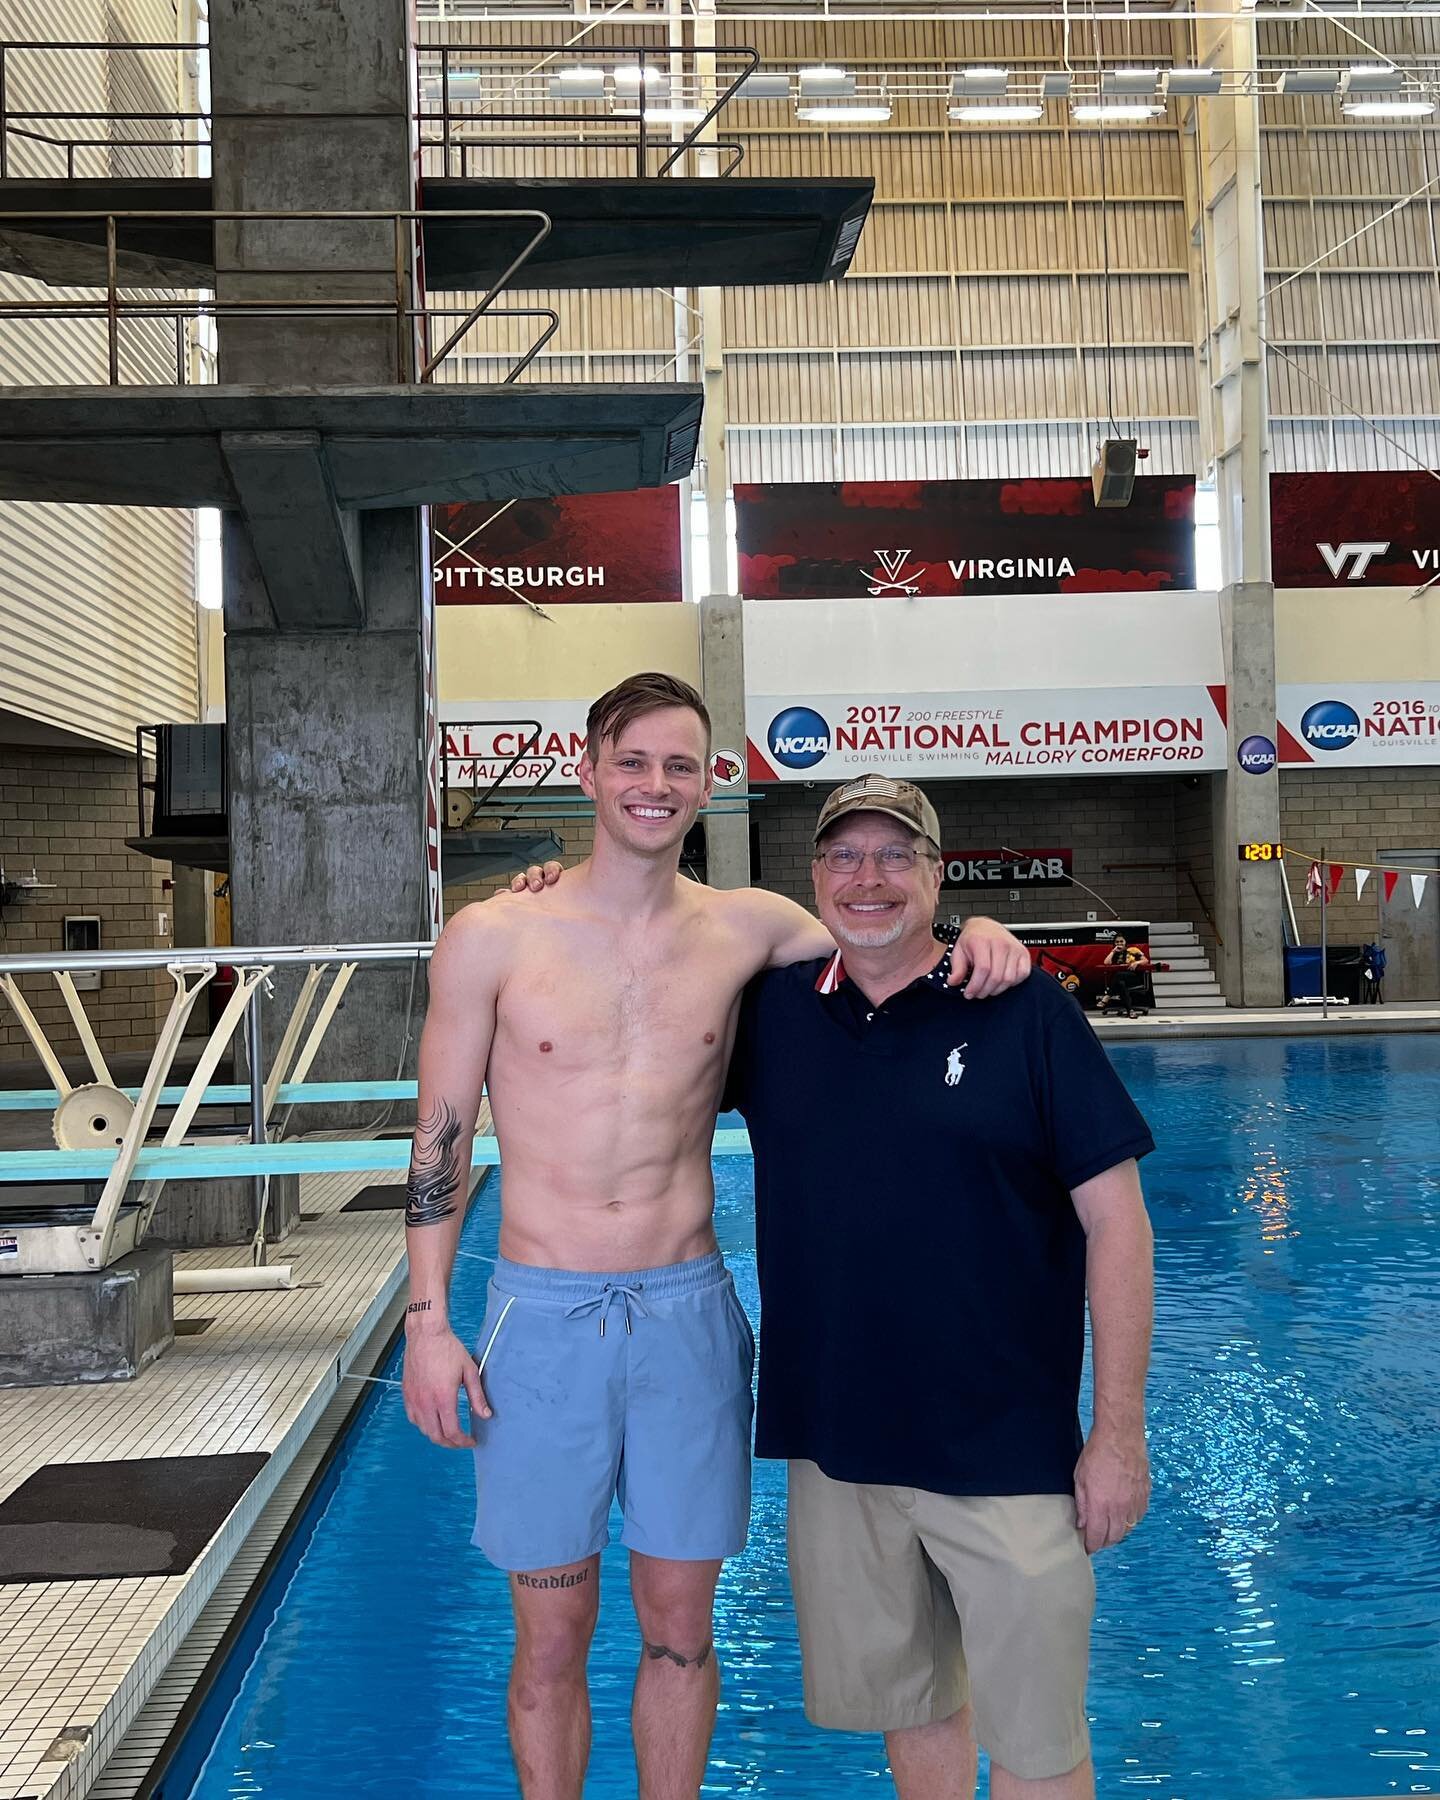 Had the privileged of @steele_johnson , 2016 Olympic silver medalist, joining our practice this weekend. 

Thanks for being an inspiration to the diving community, Steele. Your journey has been one of courage, passion, and perseverance. We can&rsquo;